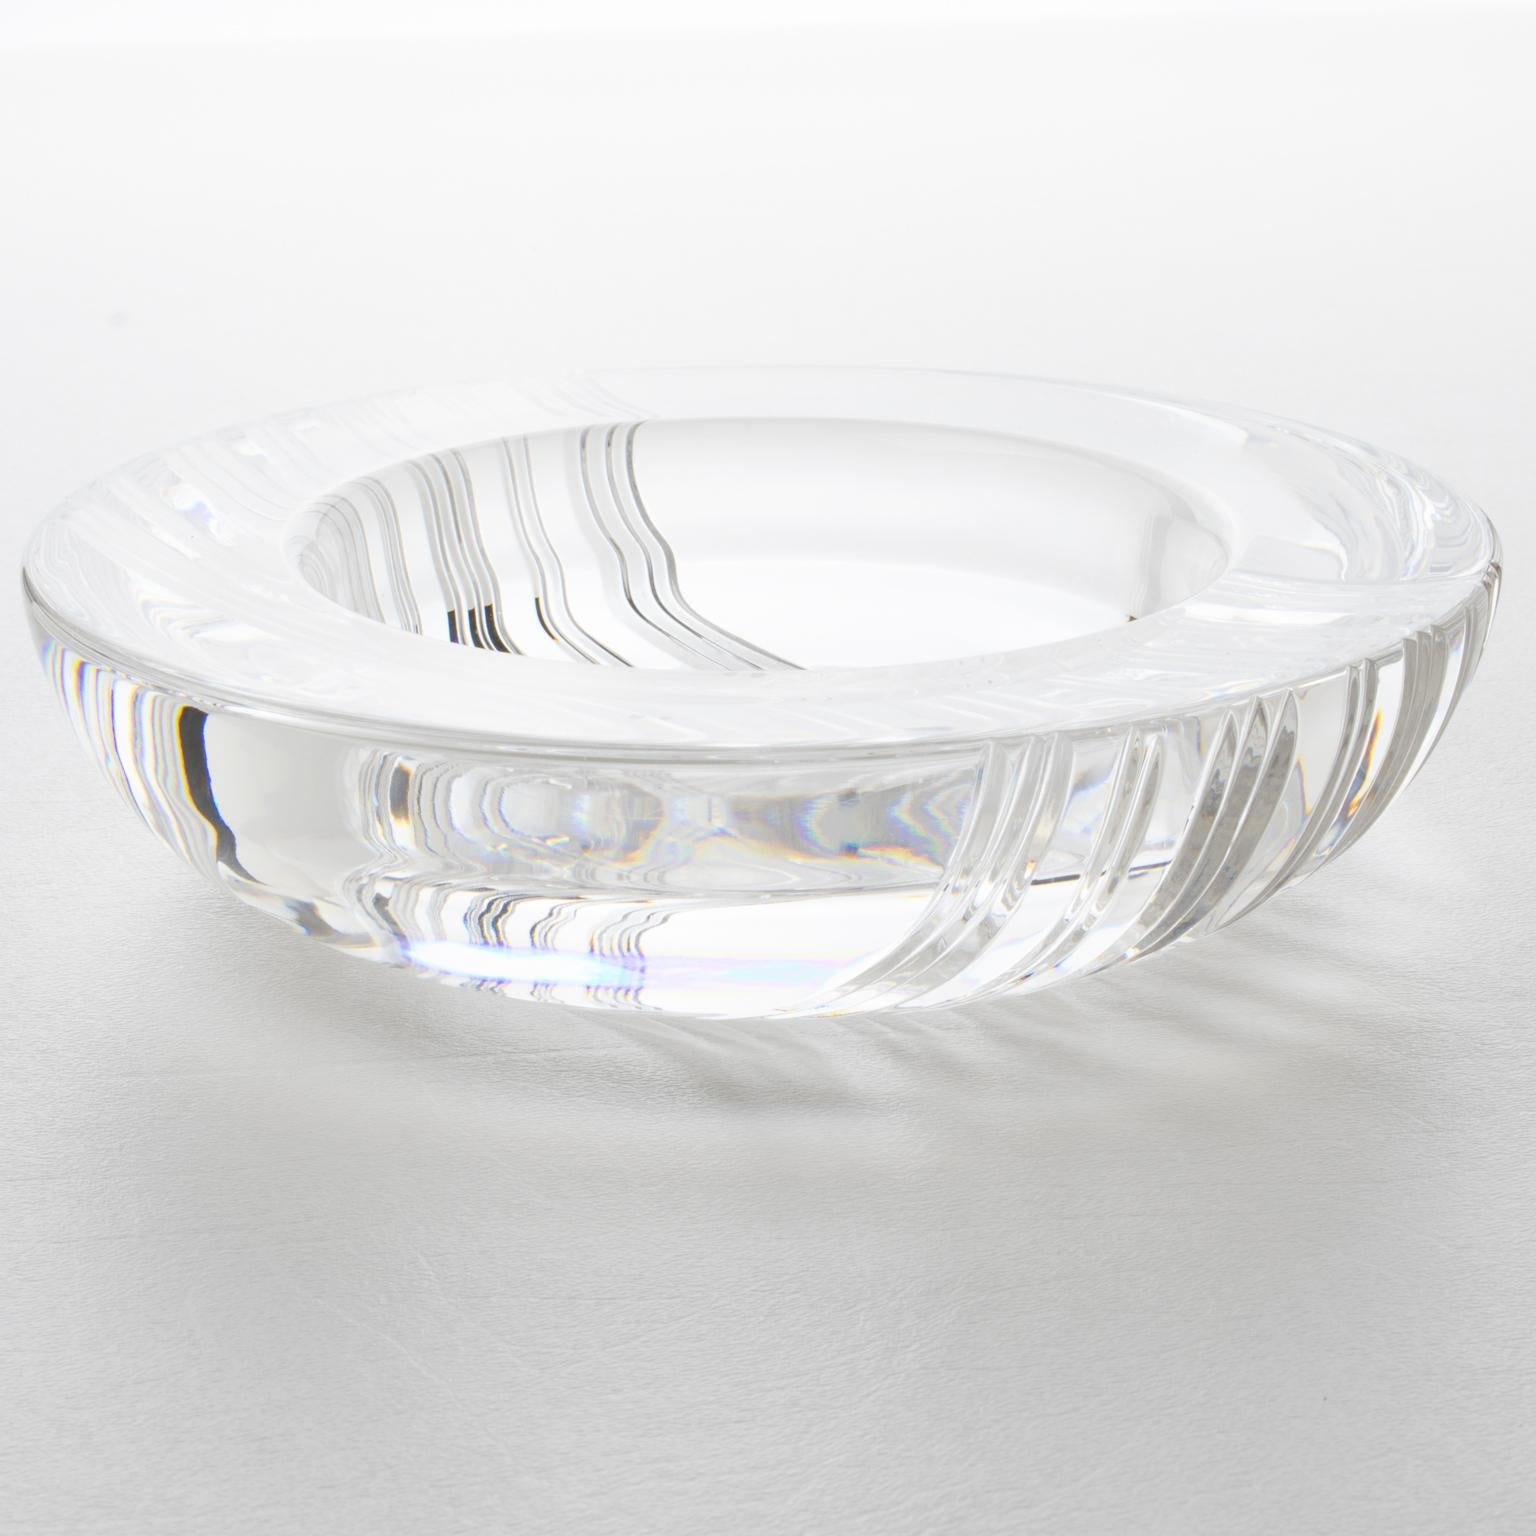 This exquisite Christian Dior crystal ashtray, or vide poche, is the perfect addition for a touch of luxury to any room. The intricate and heavily carved pattern is stunning, with alternating stripes around the bowl. It is marked with the 